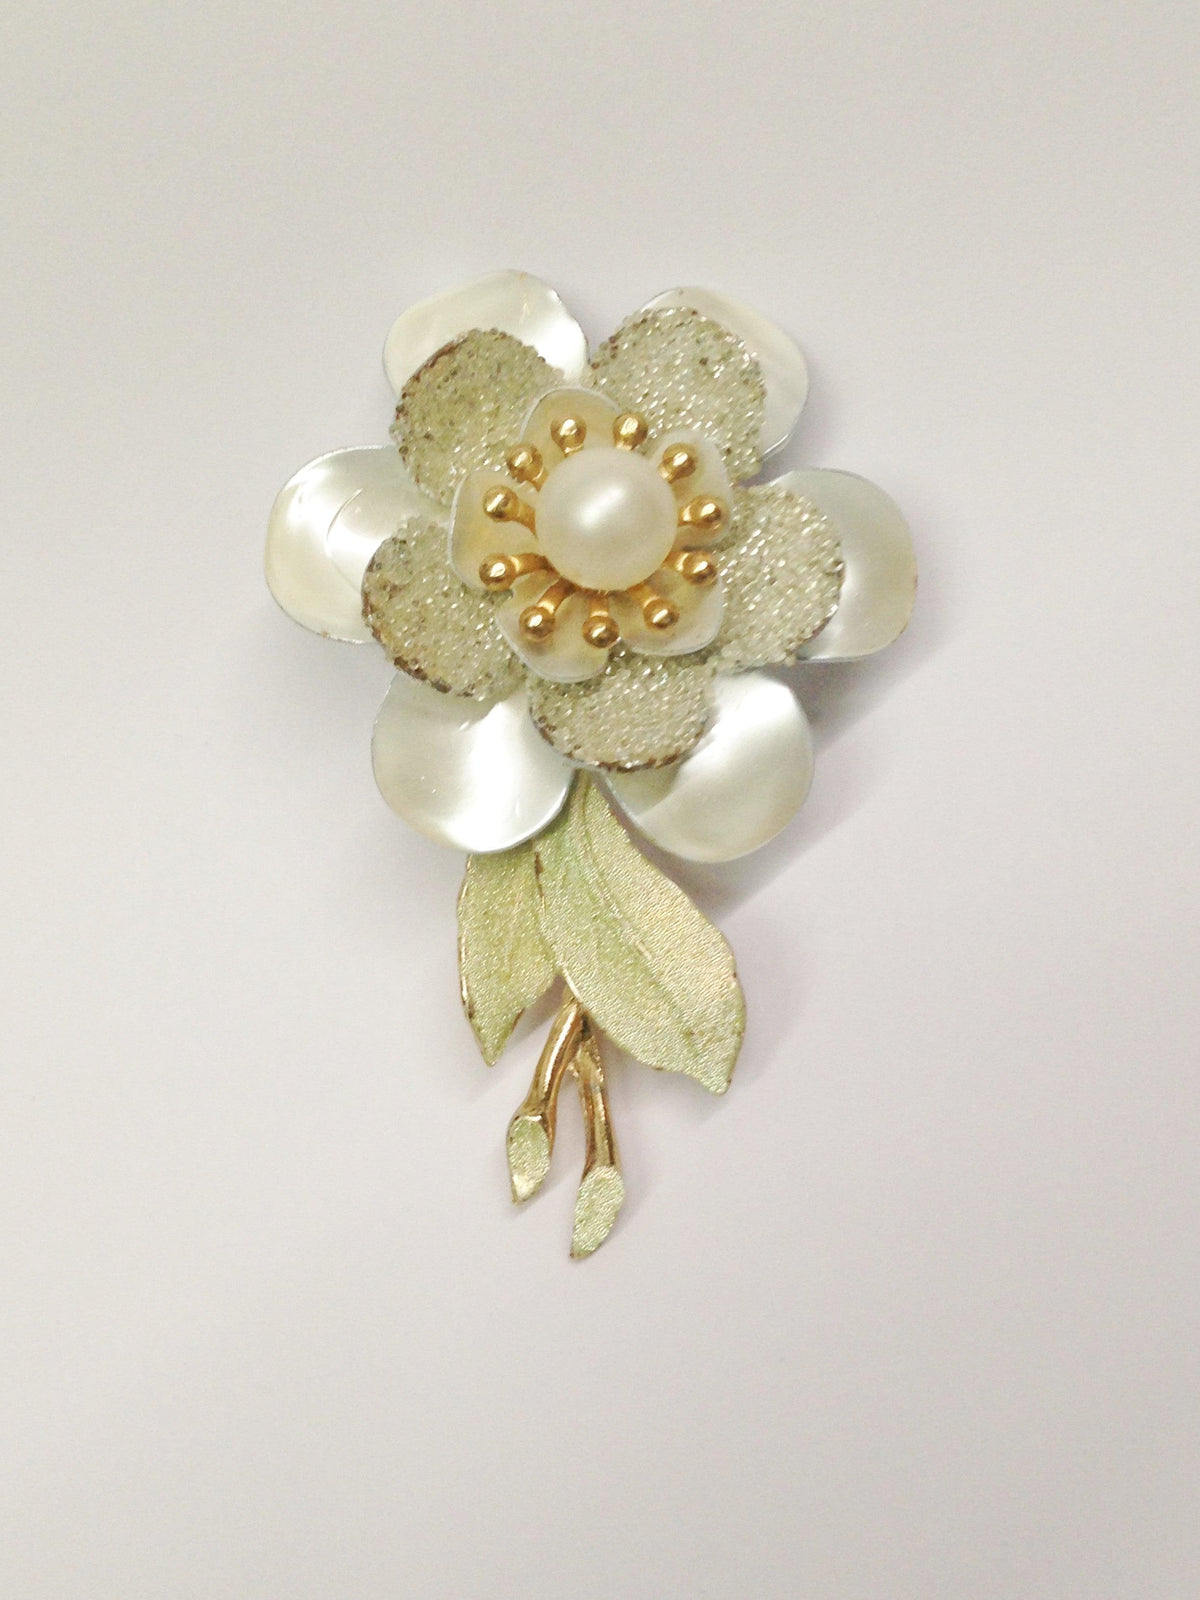 Vintage Faux Pearl Flower Brooch Pin - Hers and His Treasures